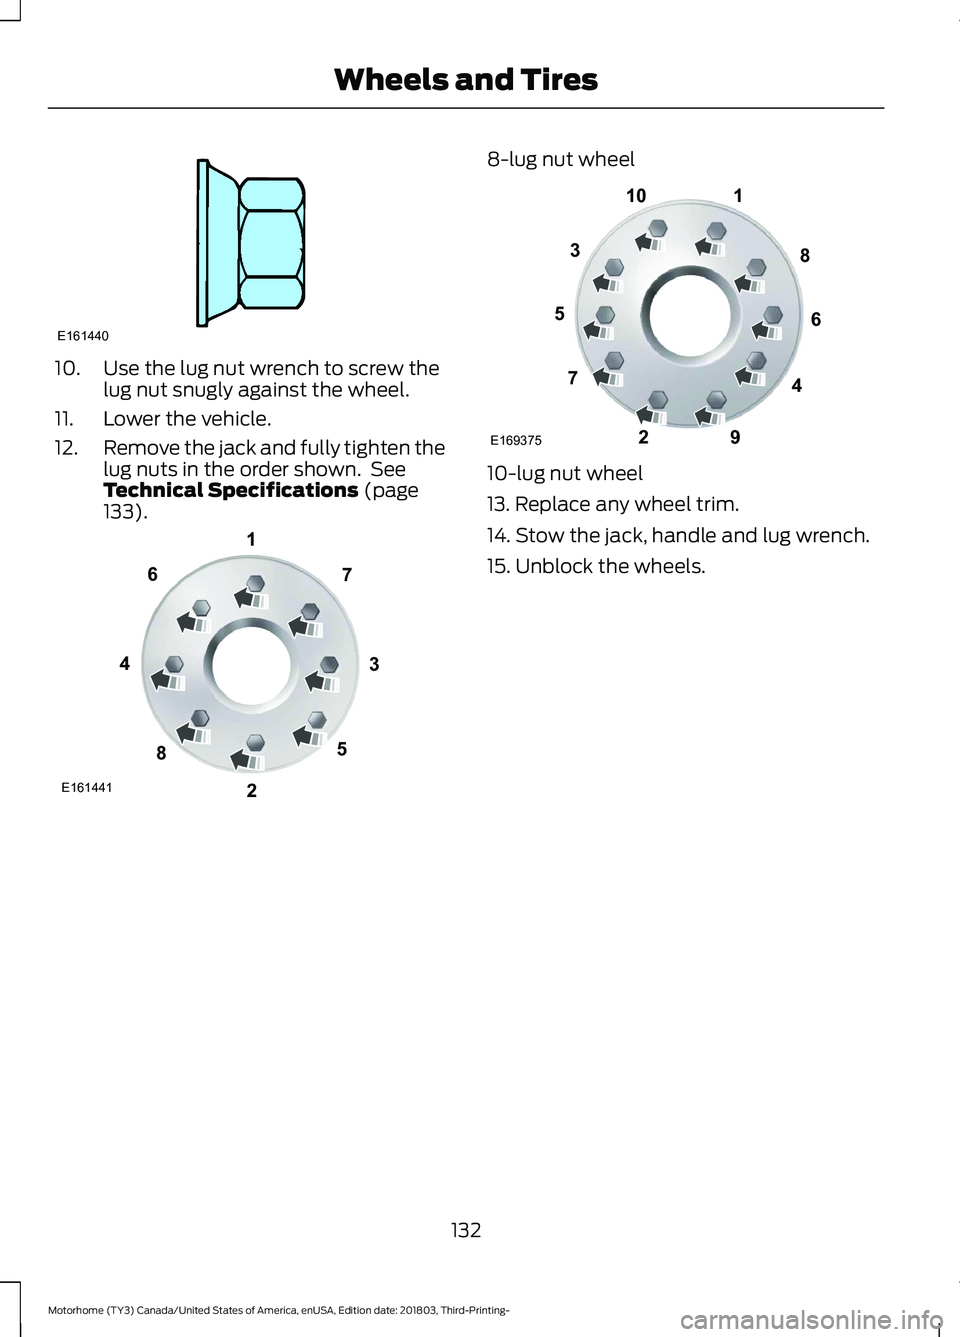 FORD F-59 2019  Owners Manual 10.Use the lug nut wrench to screw thelug nut snugly against the wheel.
11.Lower the vehicle.
12.Remove the jack and fully tighten thelug nuts in the order shown. SeeTechnical Specifications (page133)